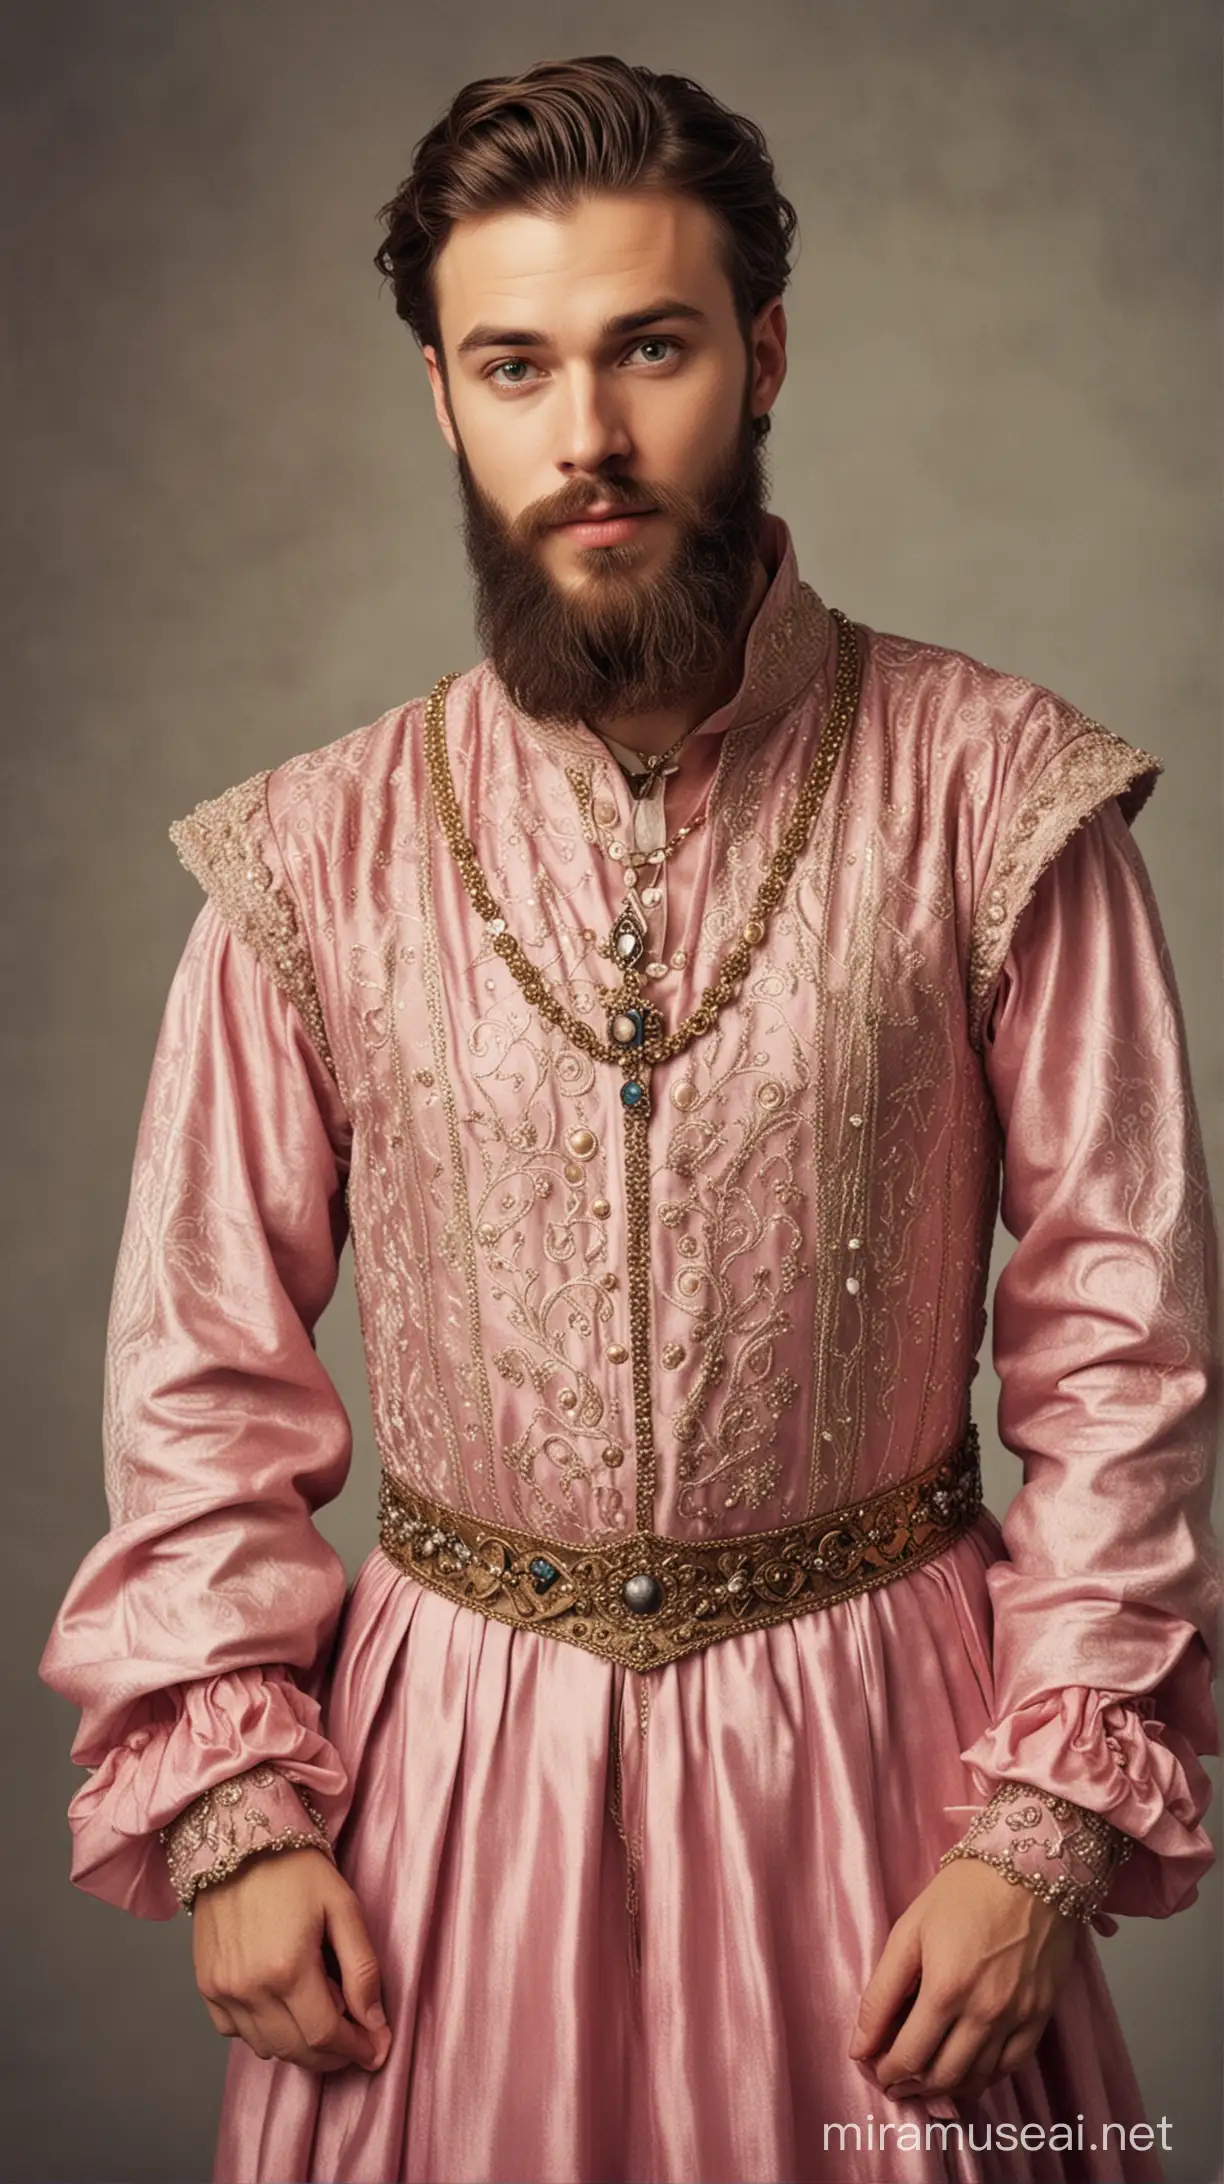 not too good looking gay guy with a beard dressed in medieval women's princess dress